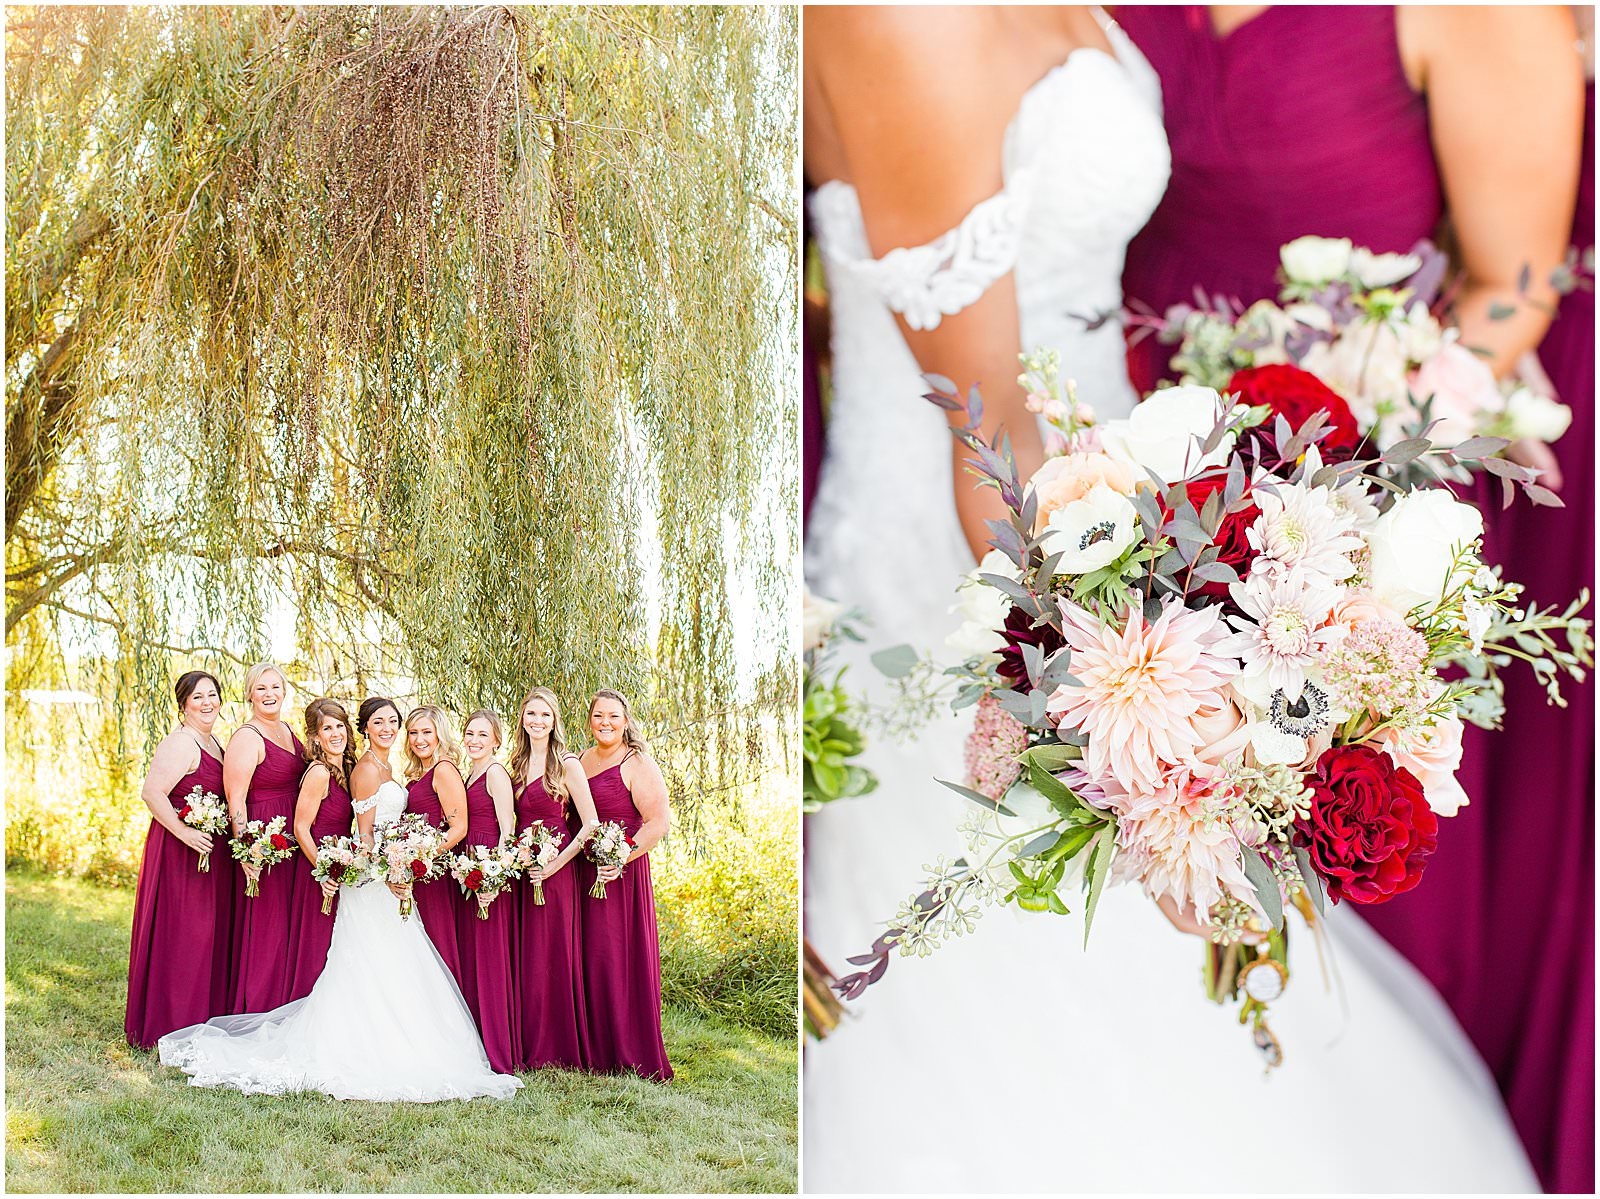 A Stunning Fall Wedding in Indianapolis, IN |. Sally and Andrew | Bret and Brandie Photography 0083.jpg